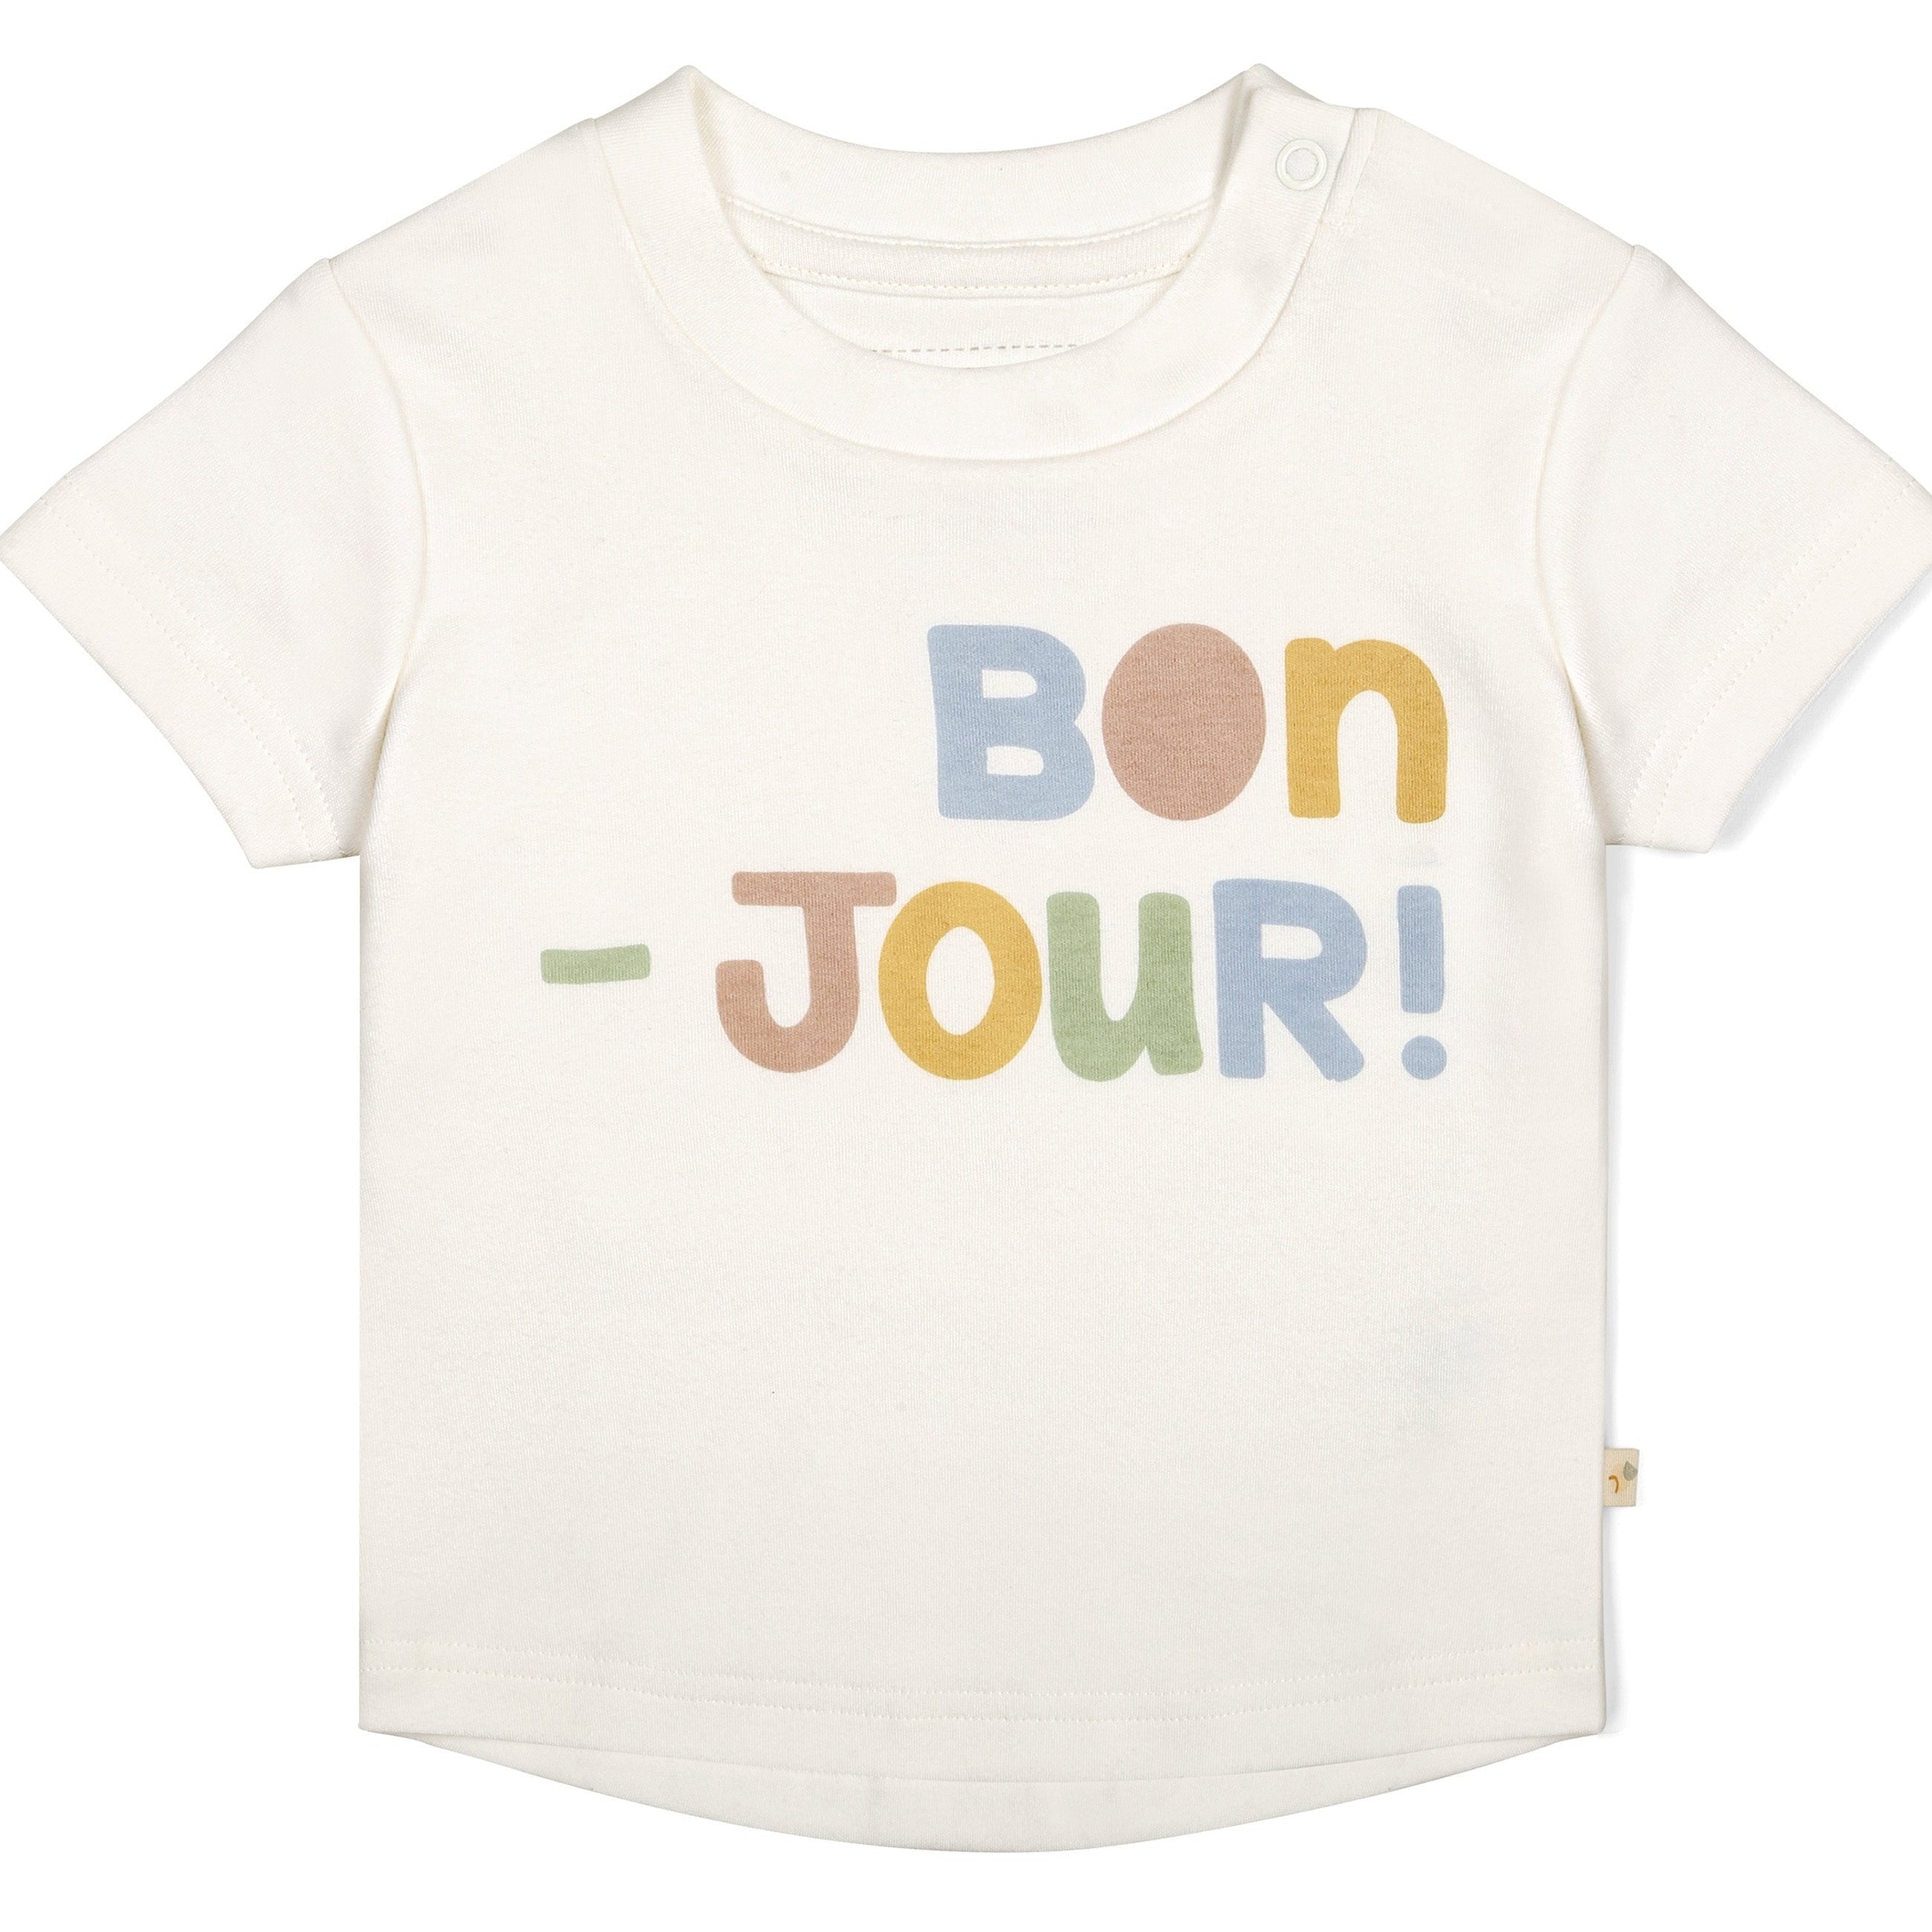 Toddler Makemake Organics organic crew neck tee in white with colorful text "bon-jour!" in rainbow font, featuring a side snap at the shoulder.